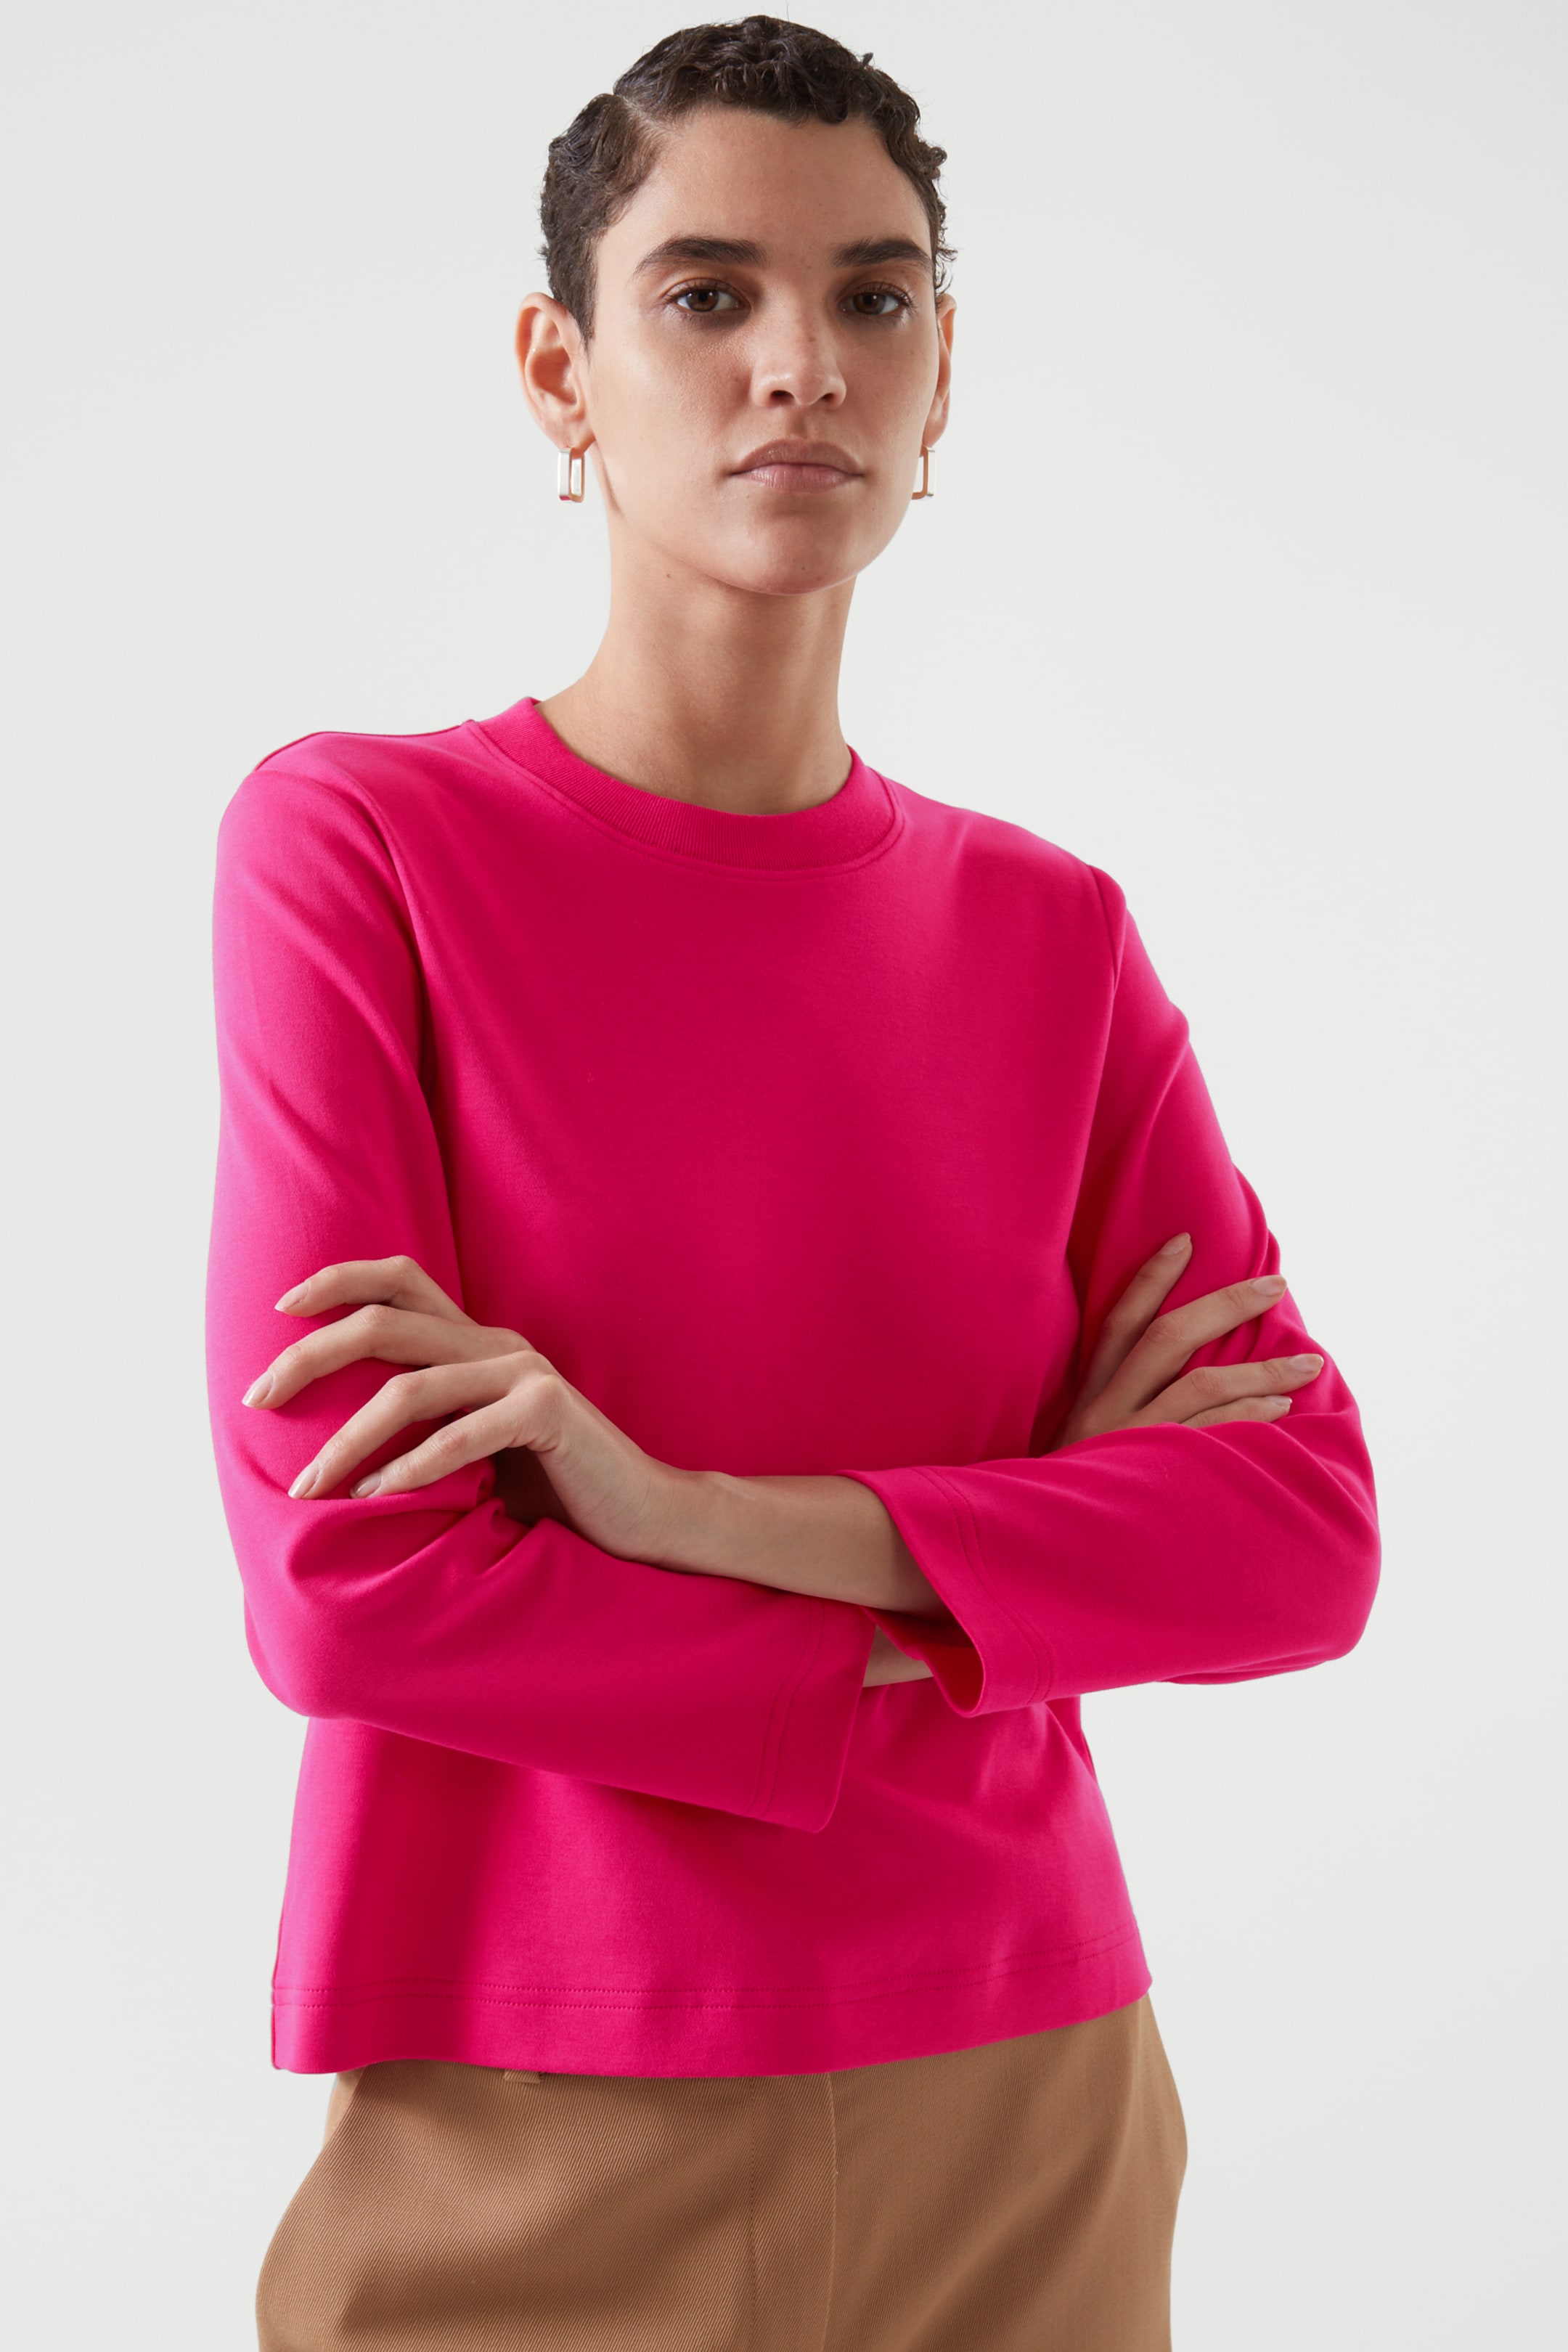 Top image of cos SLIM-FIT HEAVYWEIGHT LONG-SLEEVE T-SHIRT in BRIGHT PINK